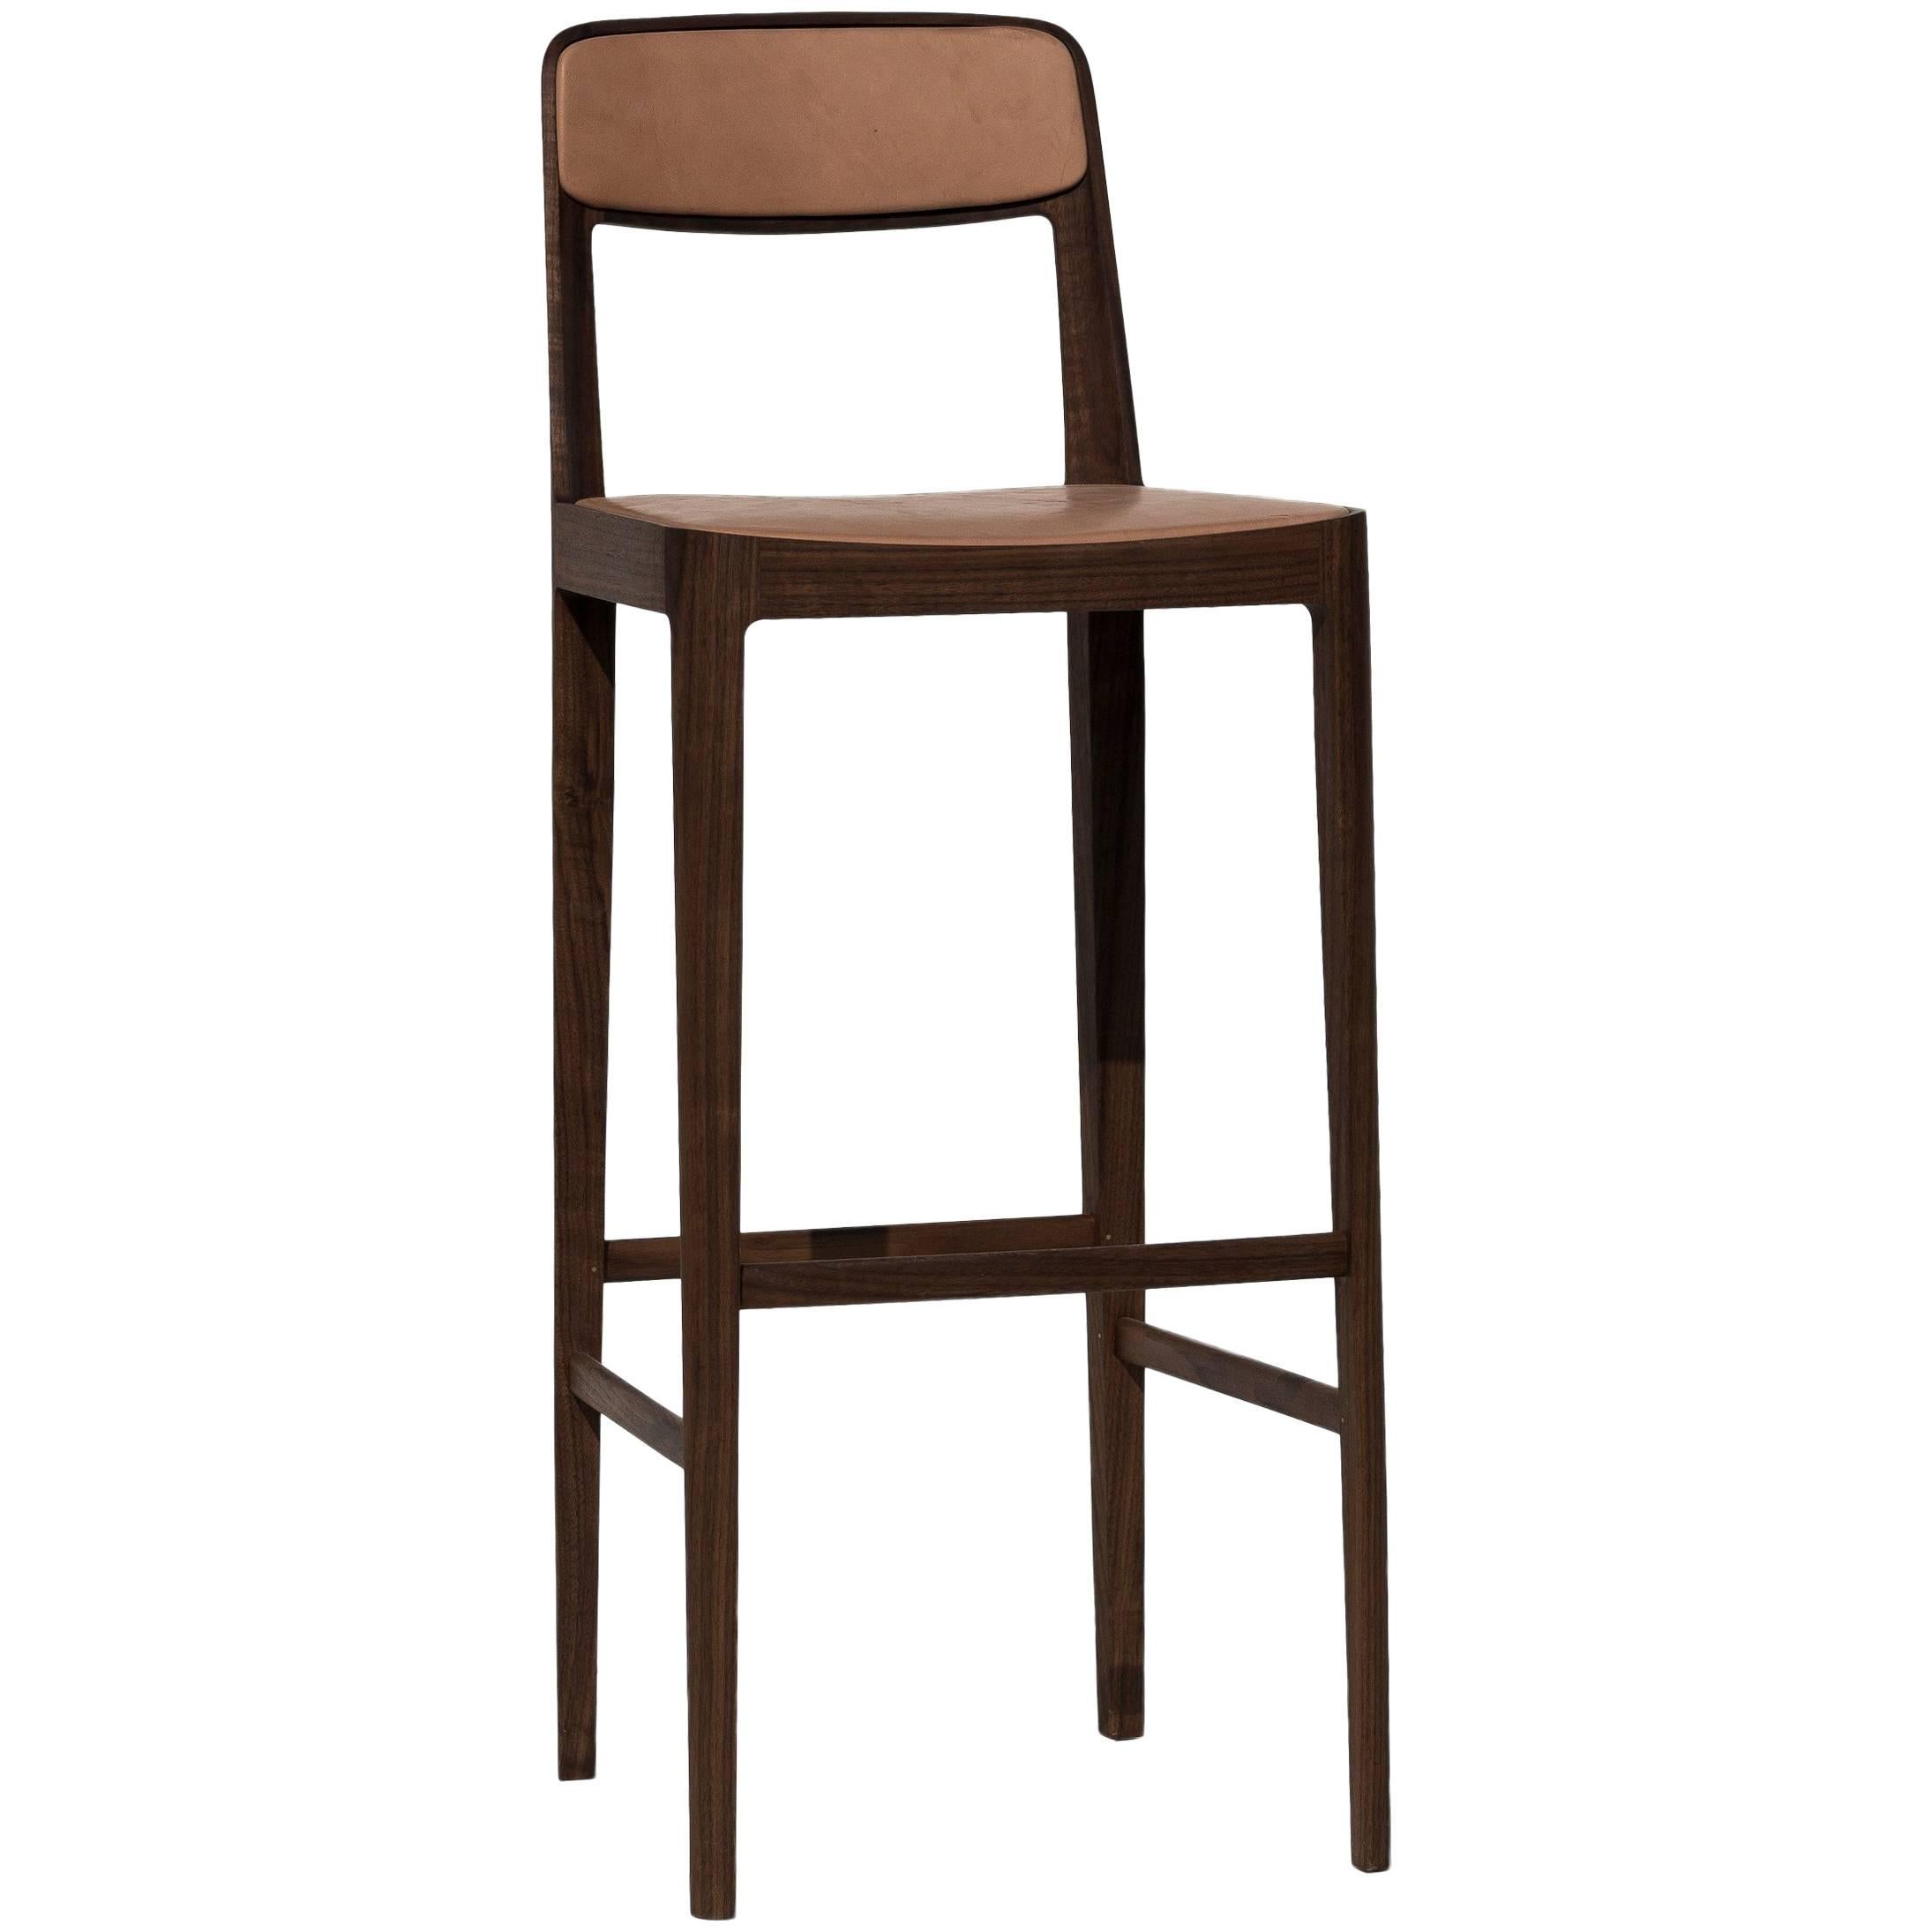 Linea Barstool, Walnut with Leather Upholstered Seat and Backrest